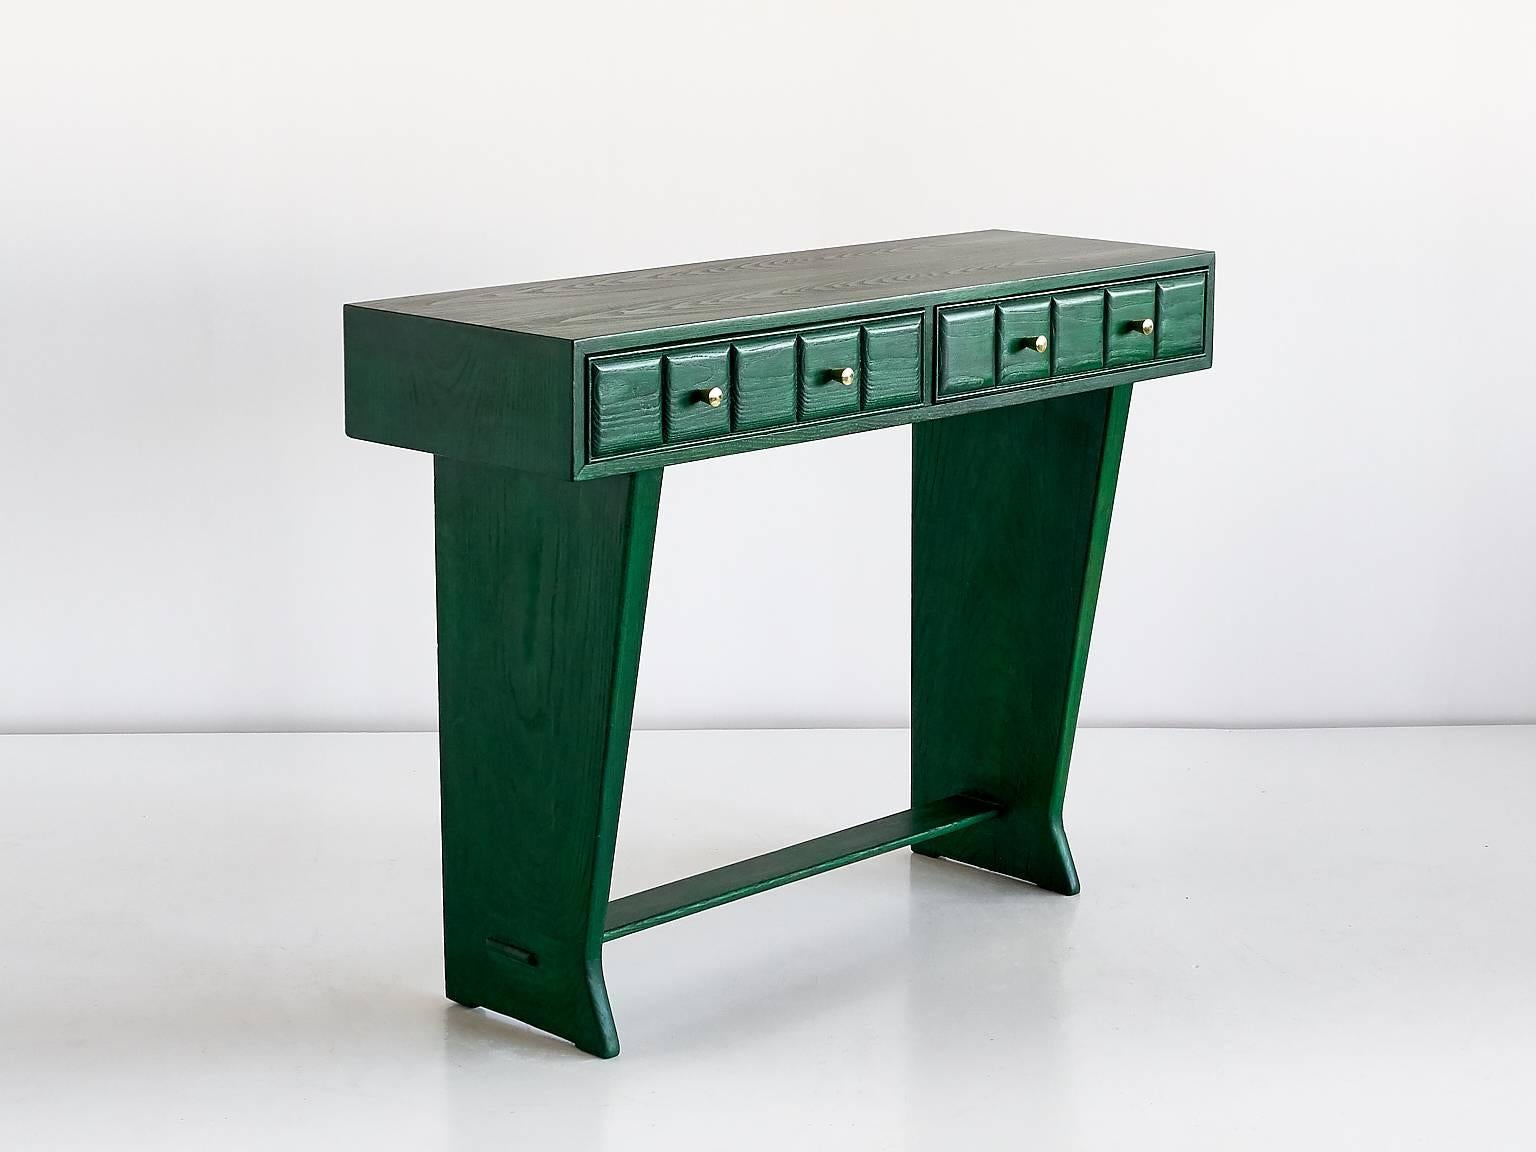 Green Italian Art Deco Console Designed for a Florentine Residence 1